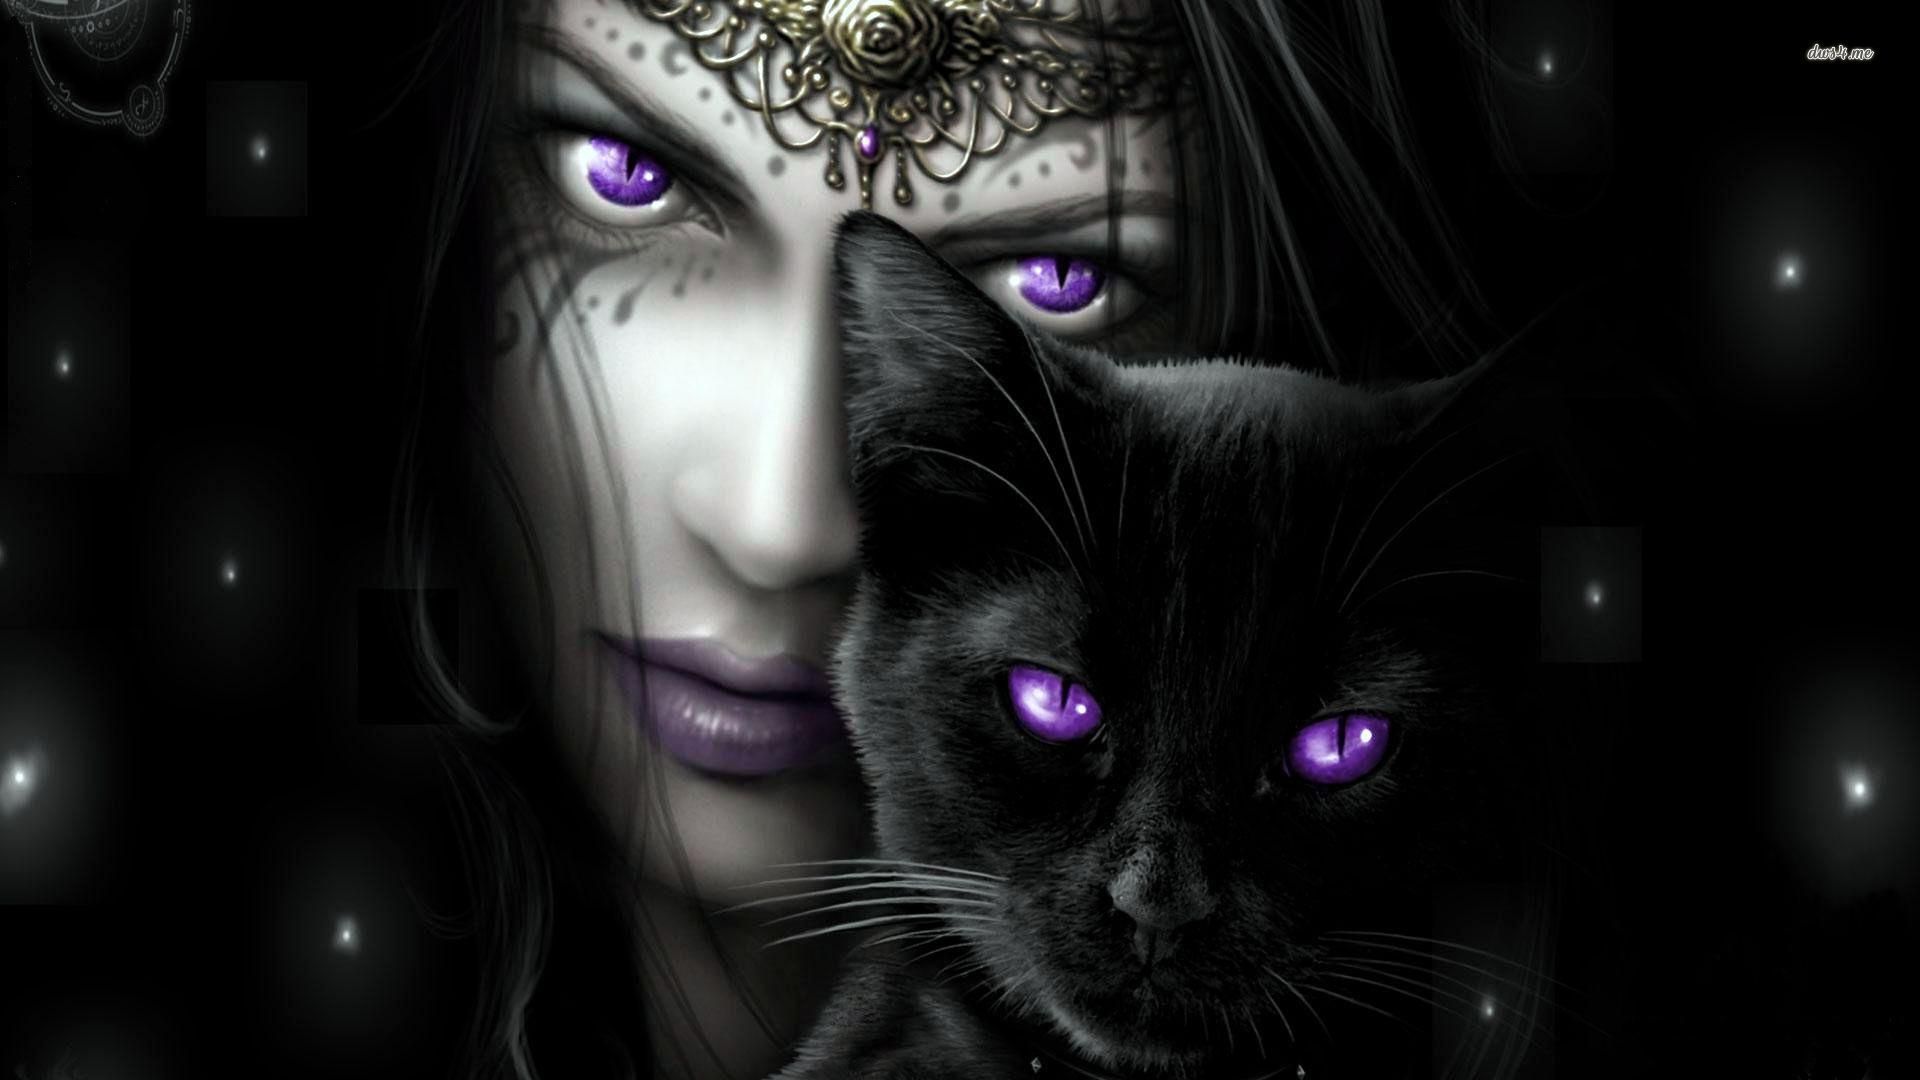 Purple eyed woman with her black cat wallpaper - Fantasy